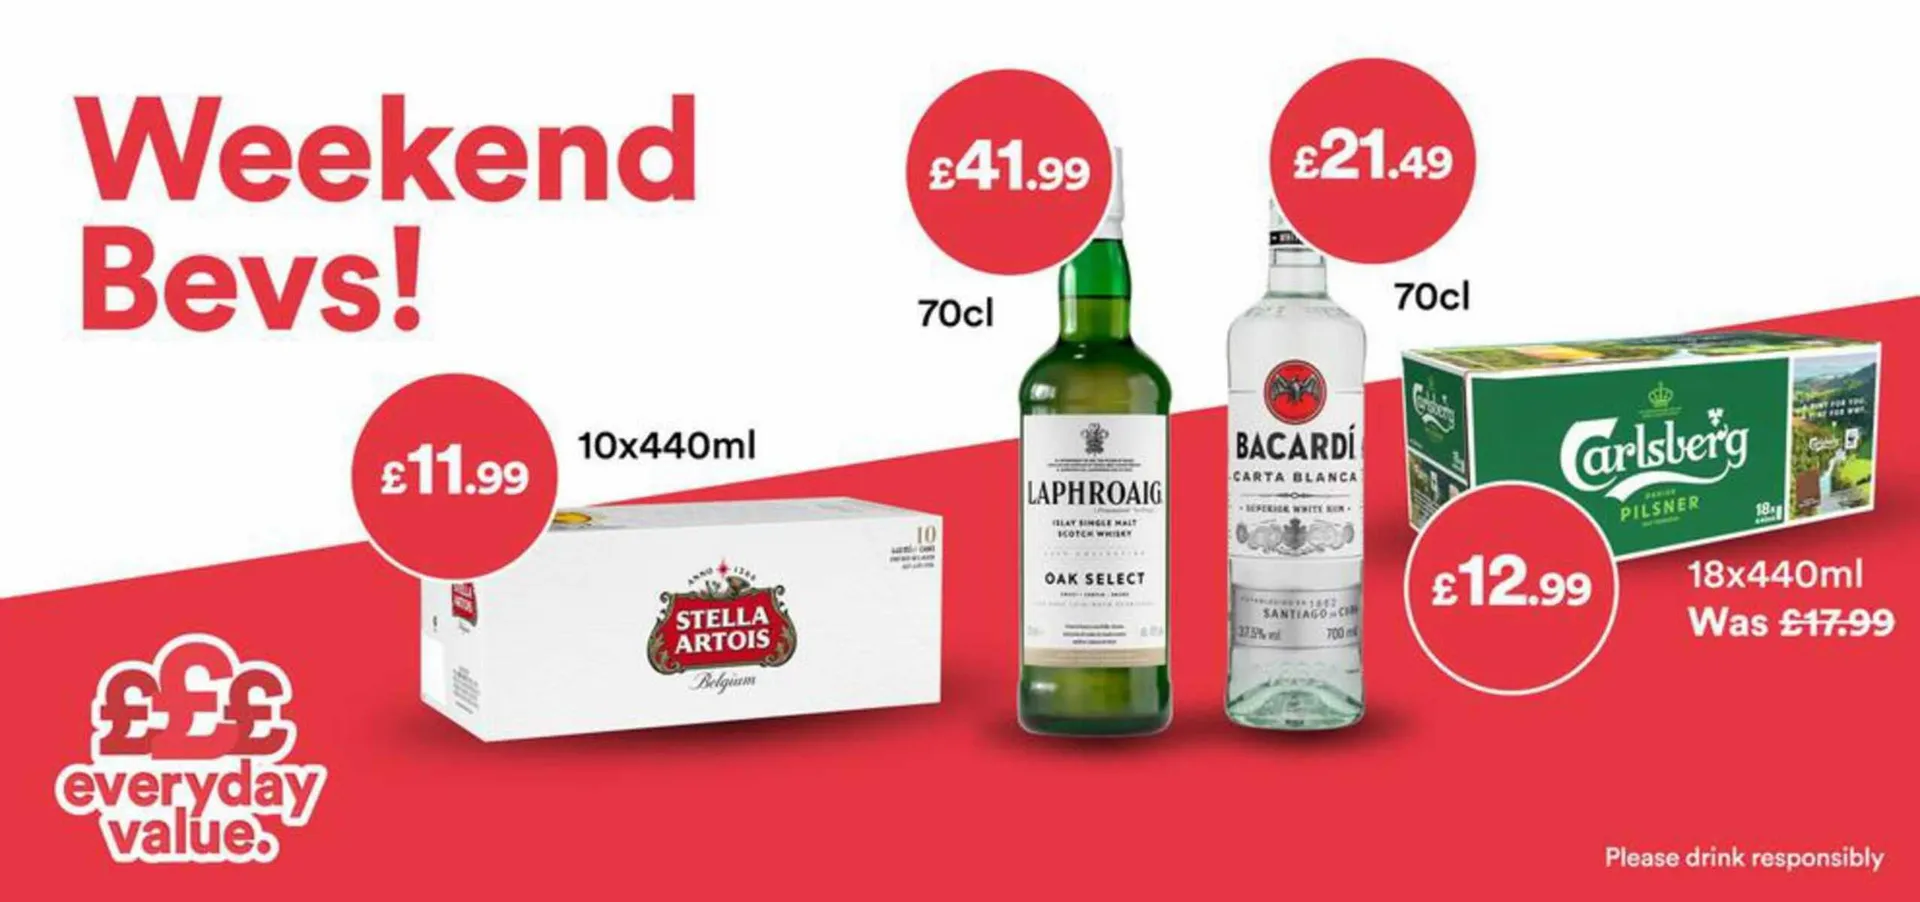 Costcutter Weekly Offers - 2